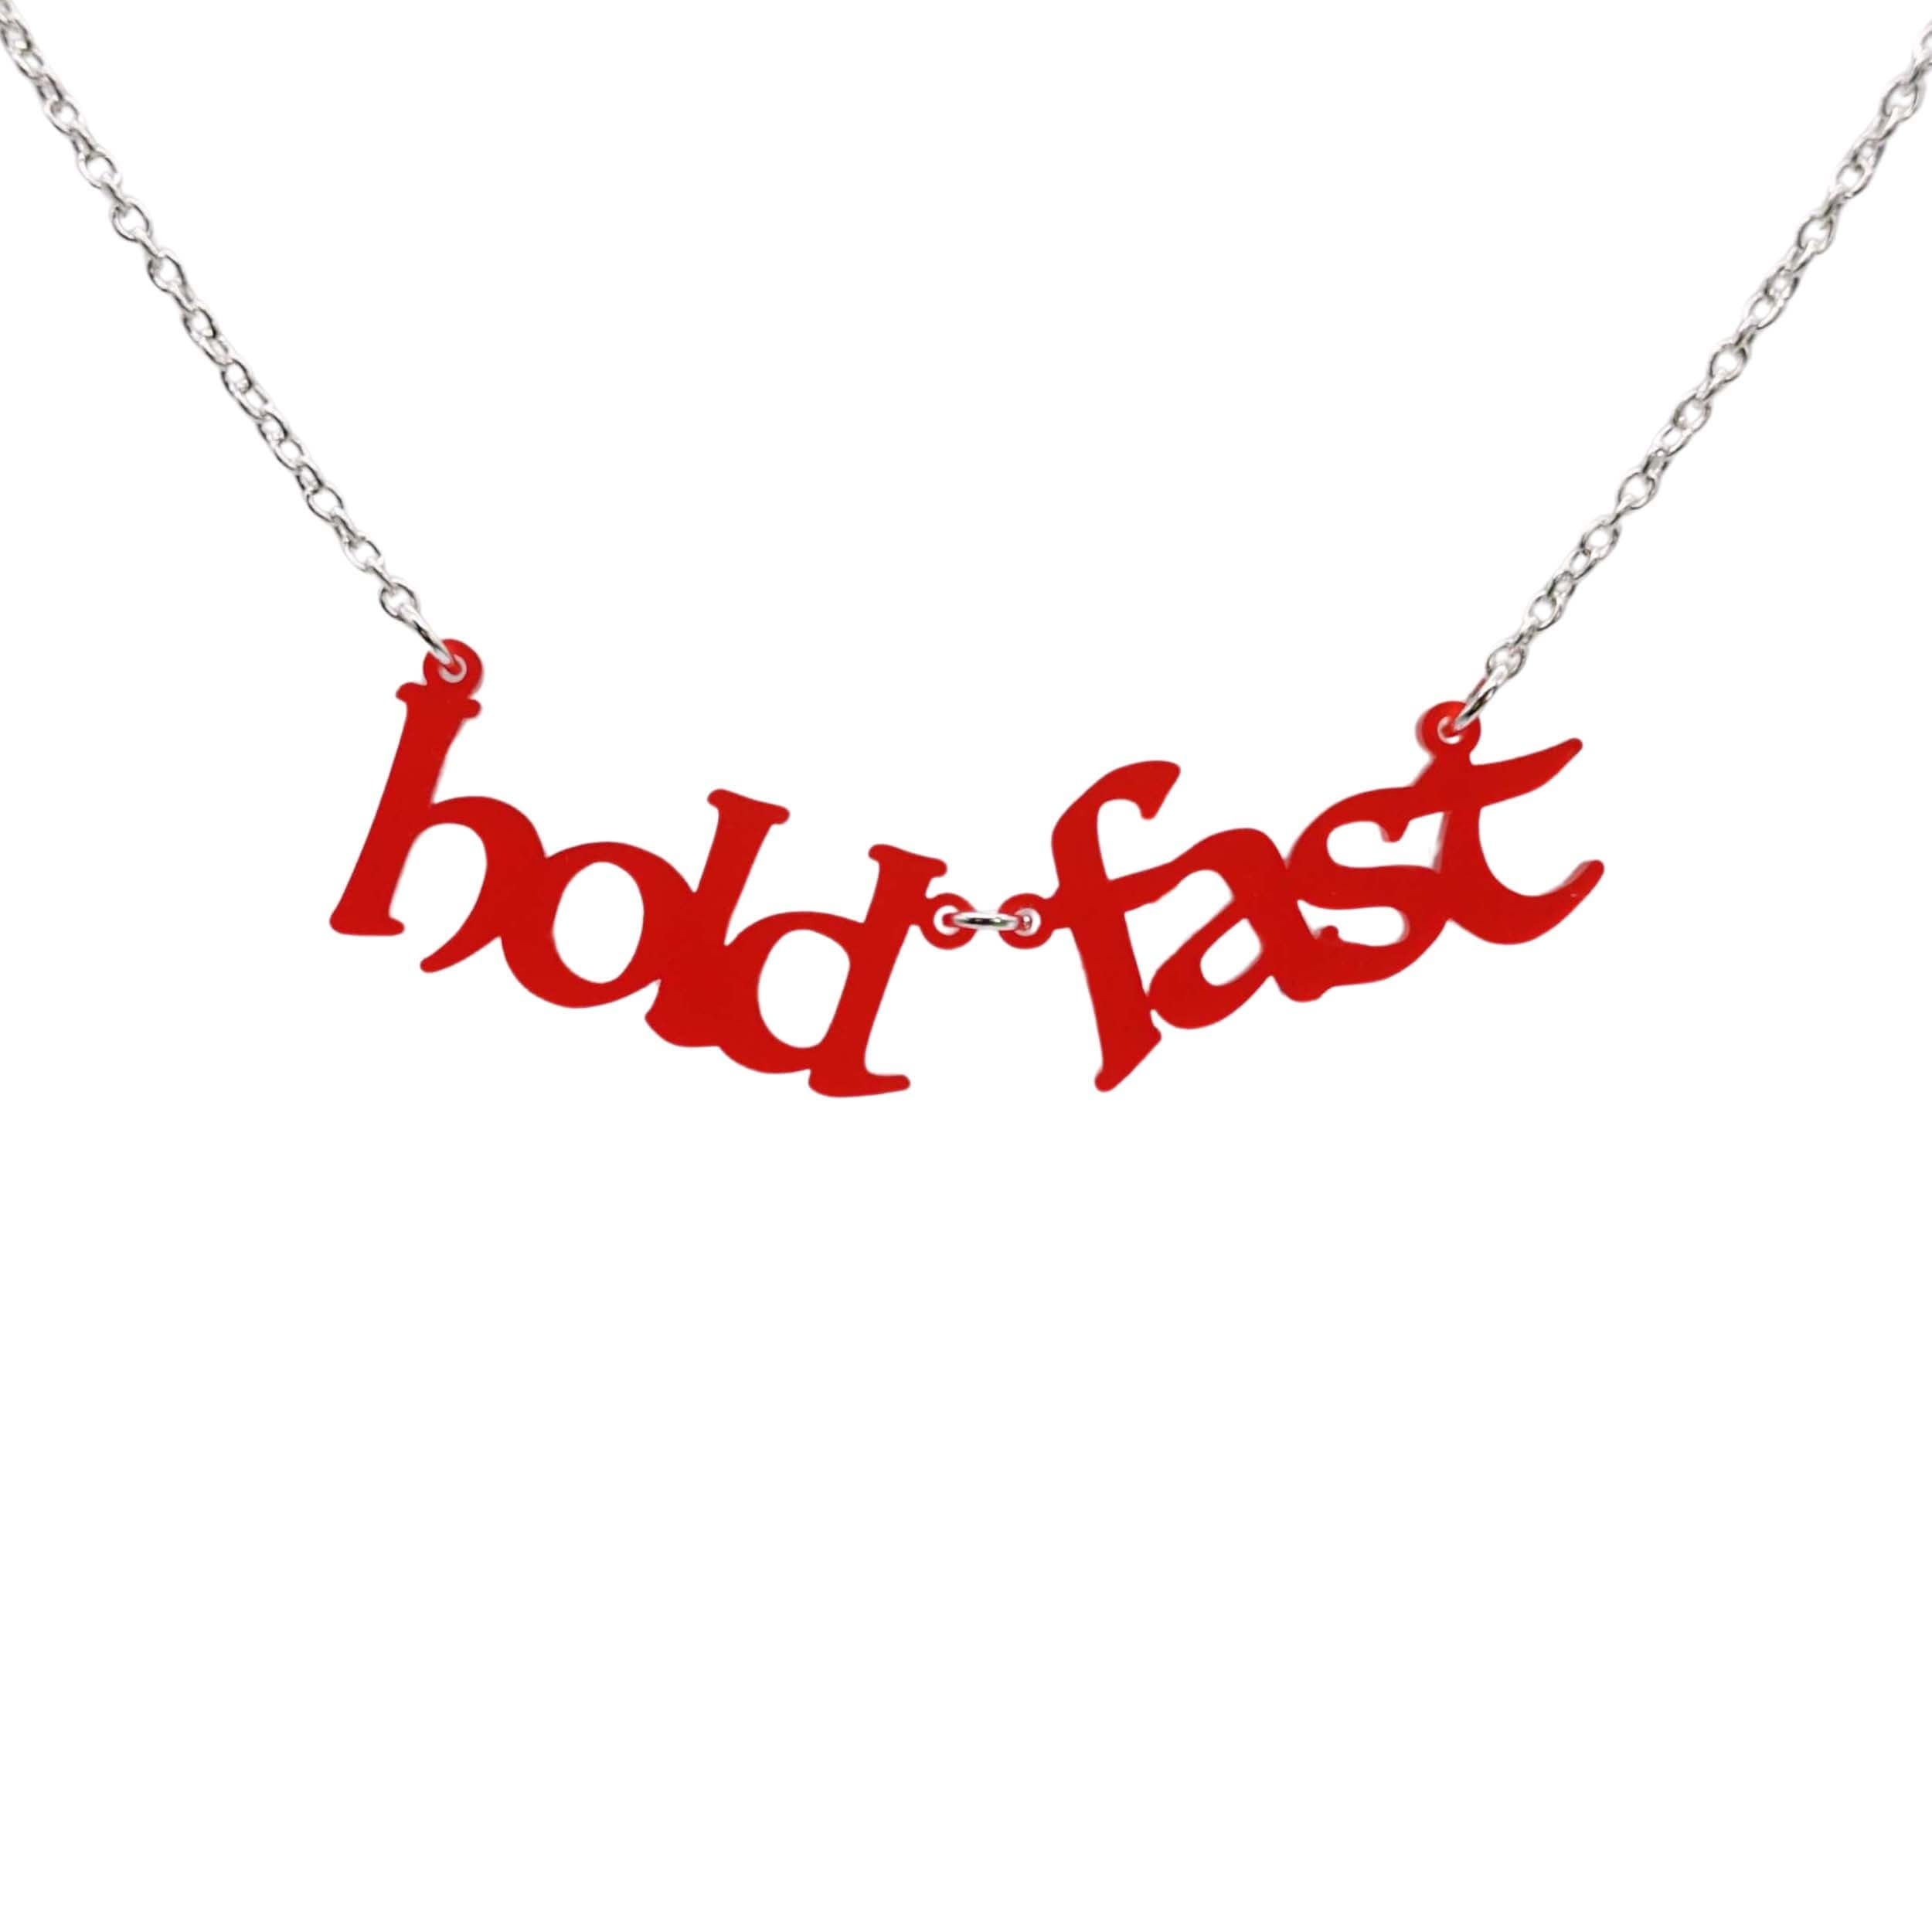 Chilli red frost Hold Fast necklace shown hanging against a white backround. 